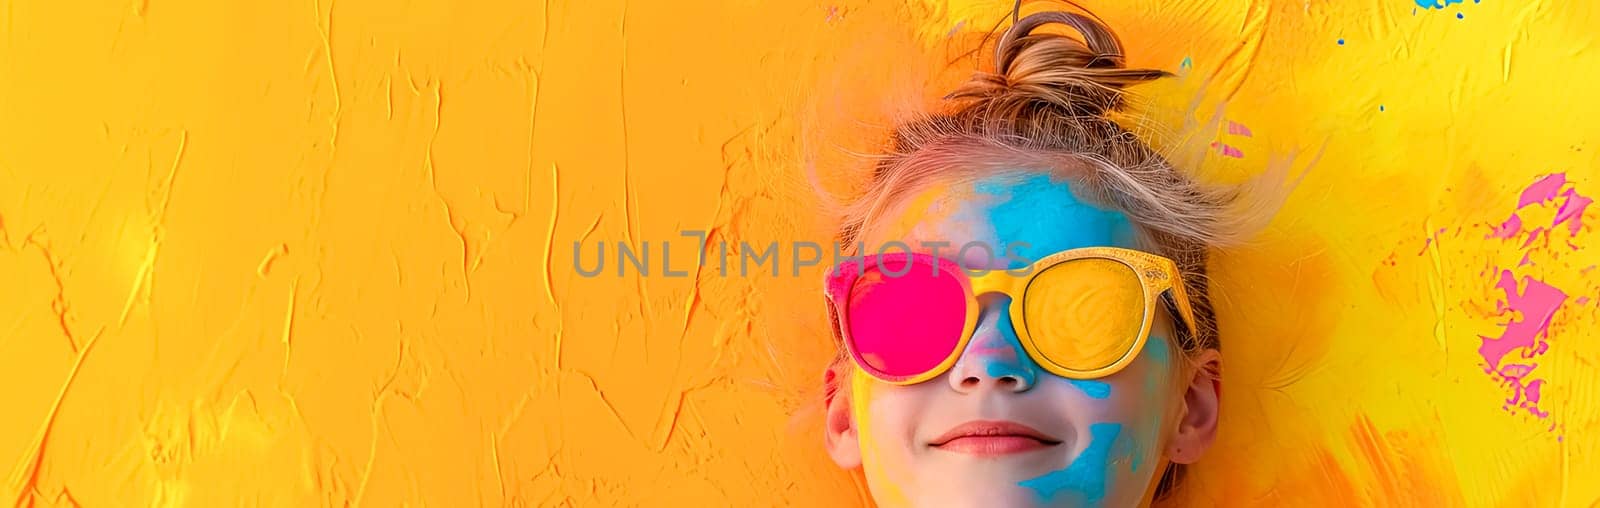 portrait of a person with a playful and creative presentation. The background and the person are awash in a bright yellow hue, with splashes of vivid blue and pink paint adorning the person's face. by Edophoto